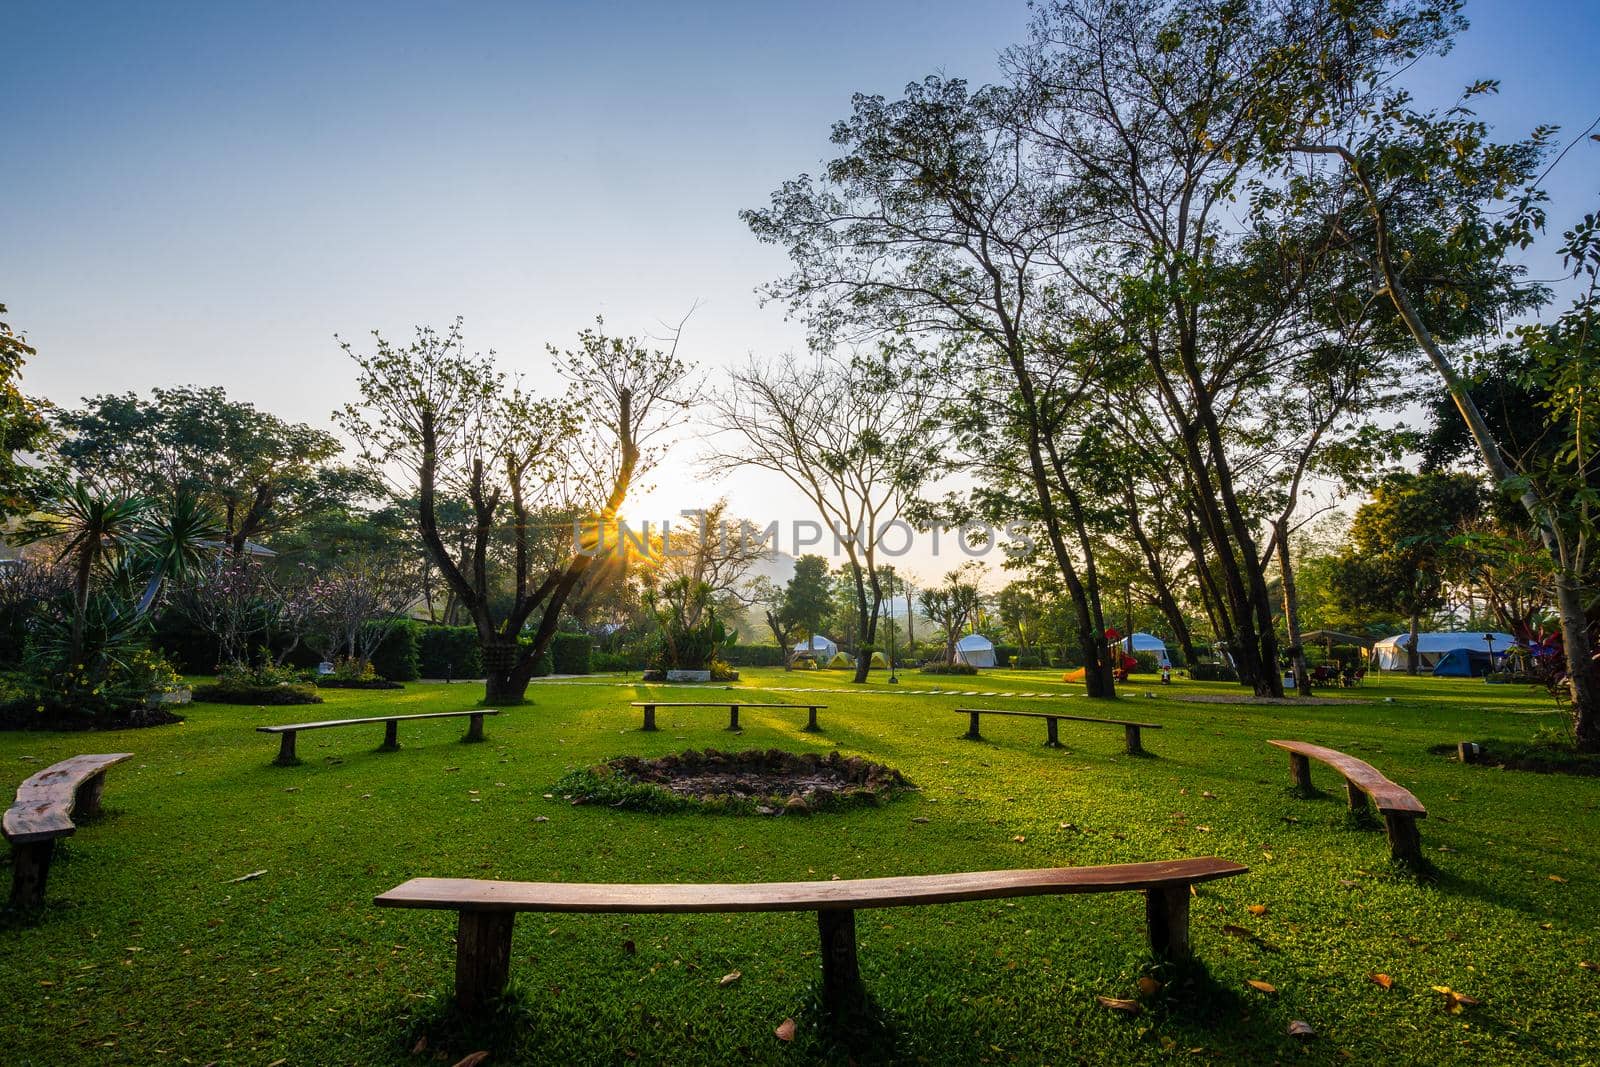 circle bench and sunrise in the park by domonite